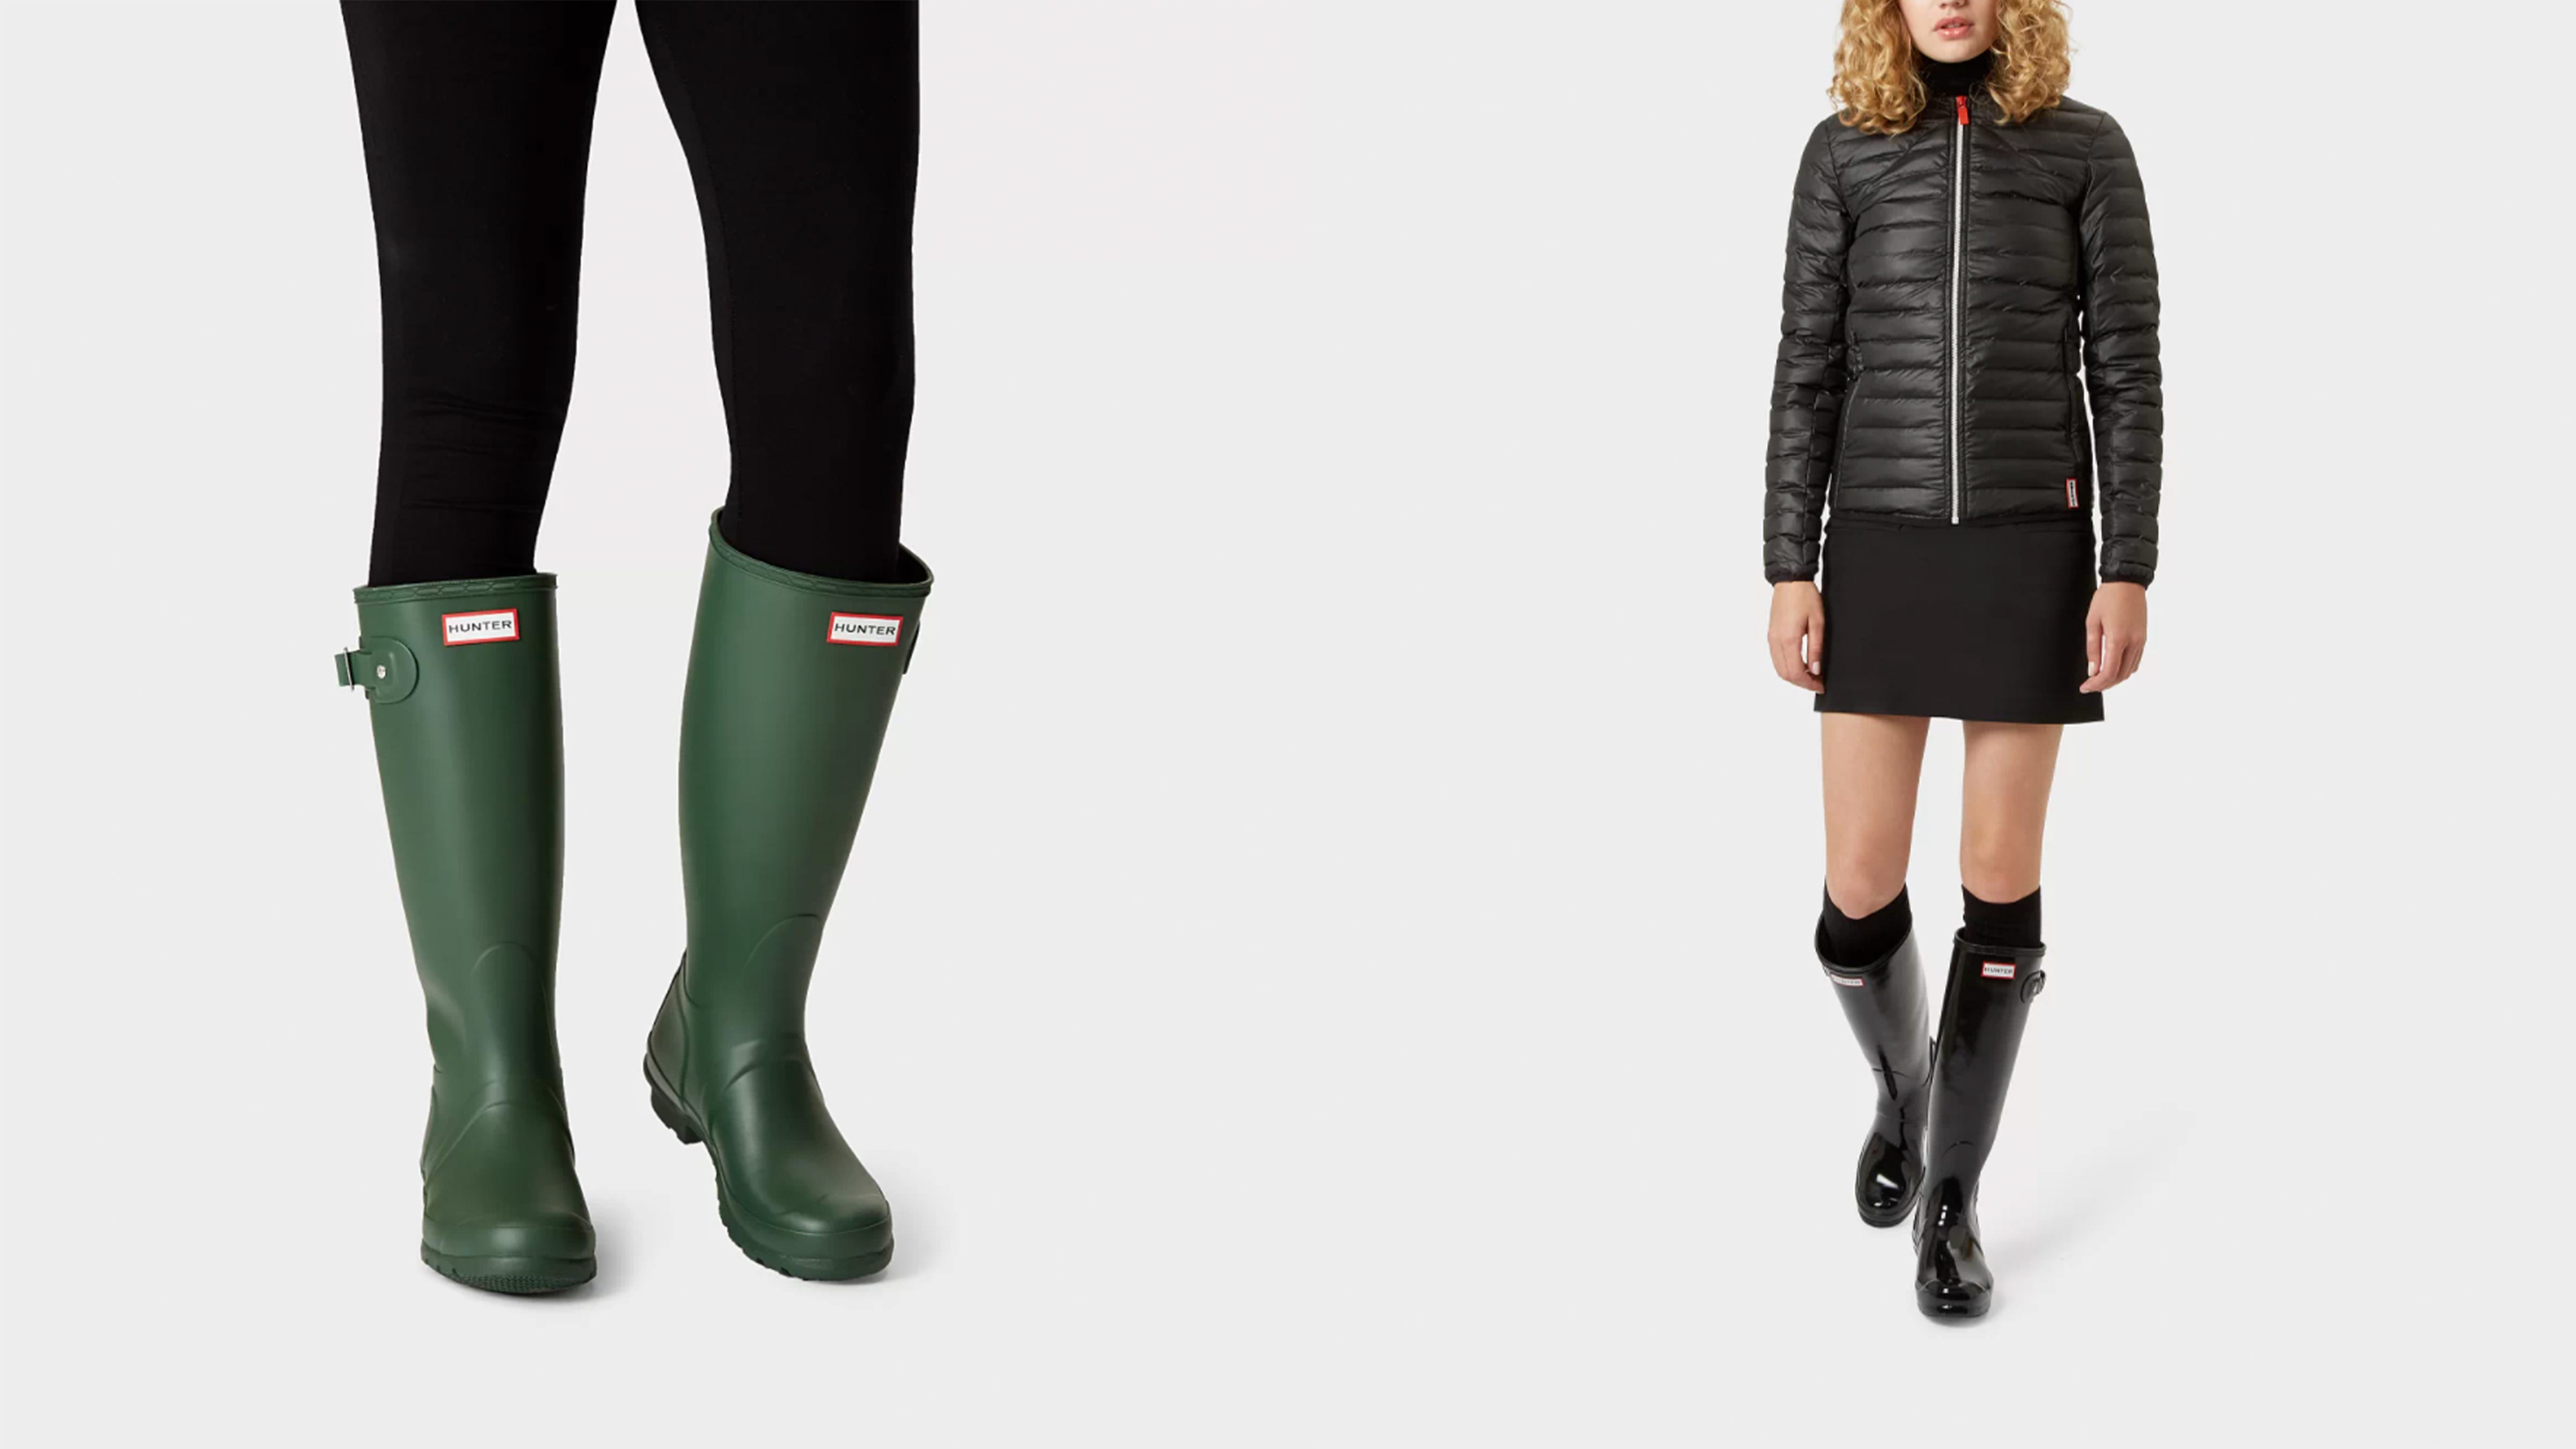 Hunter boots sale: Save big on these 